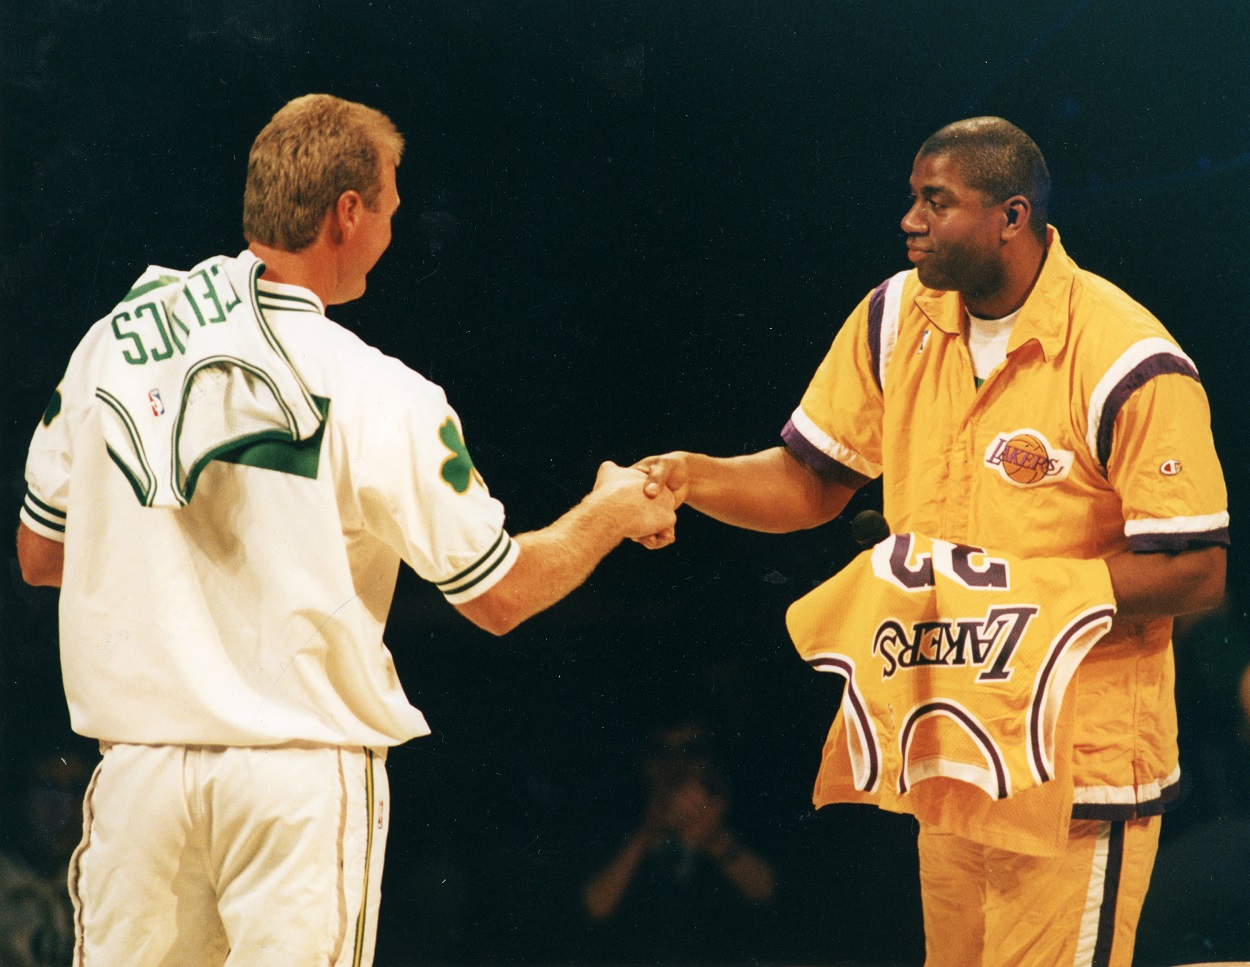 Celtics forward Larry Bird and Lakers guard Magic Johnson embrace each other.